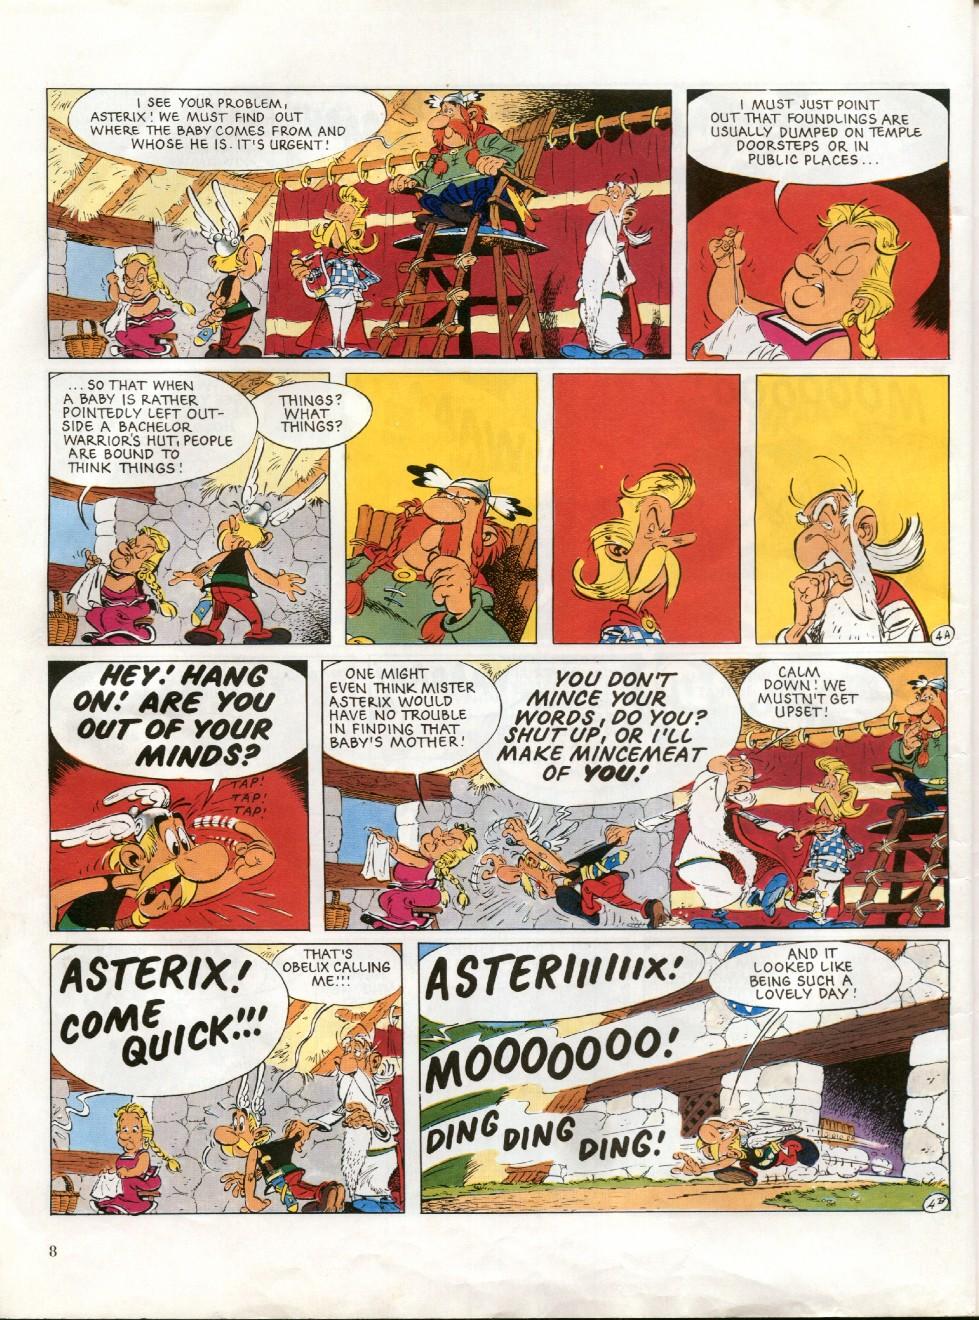 27 Asterix And Son | Read 27 Asterix And Son comic online in high ...